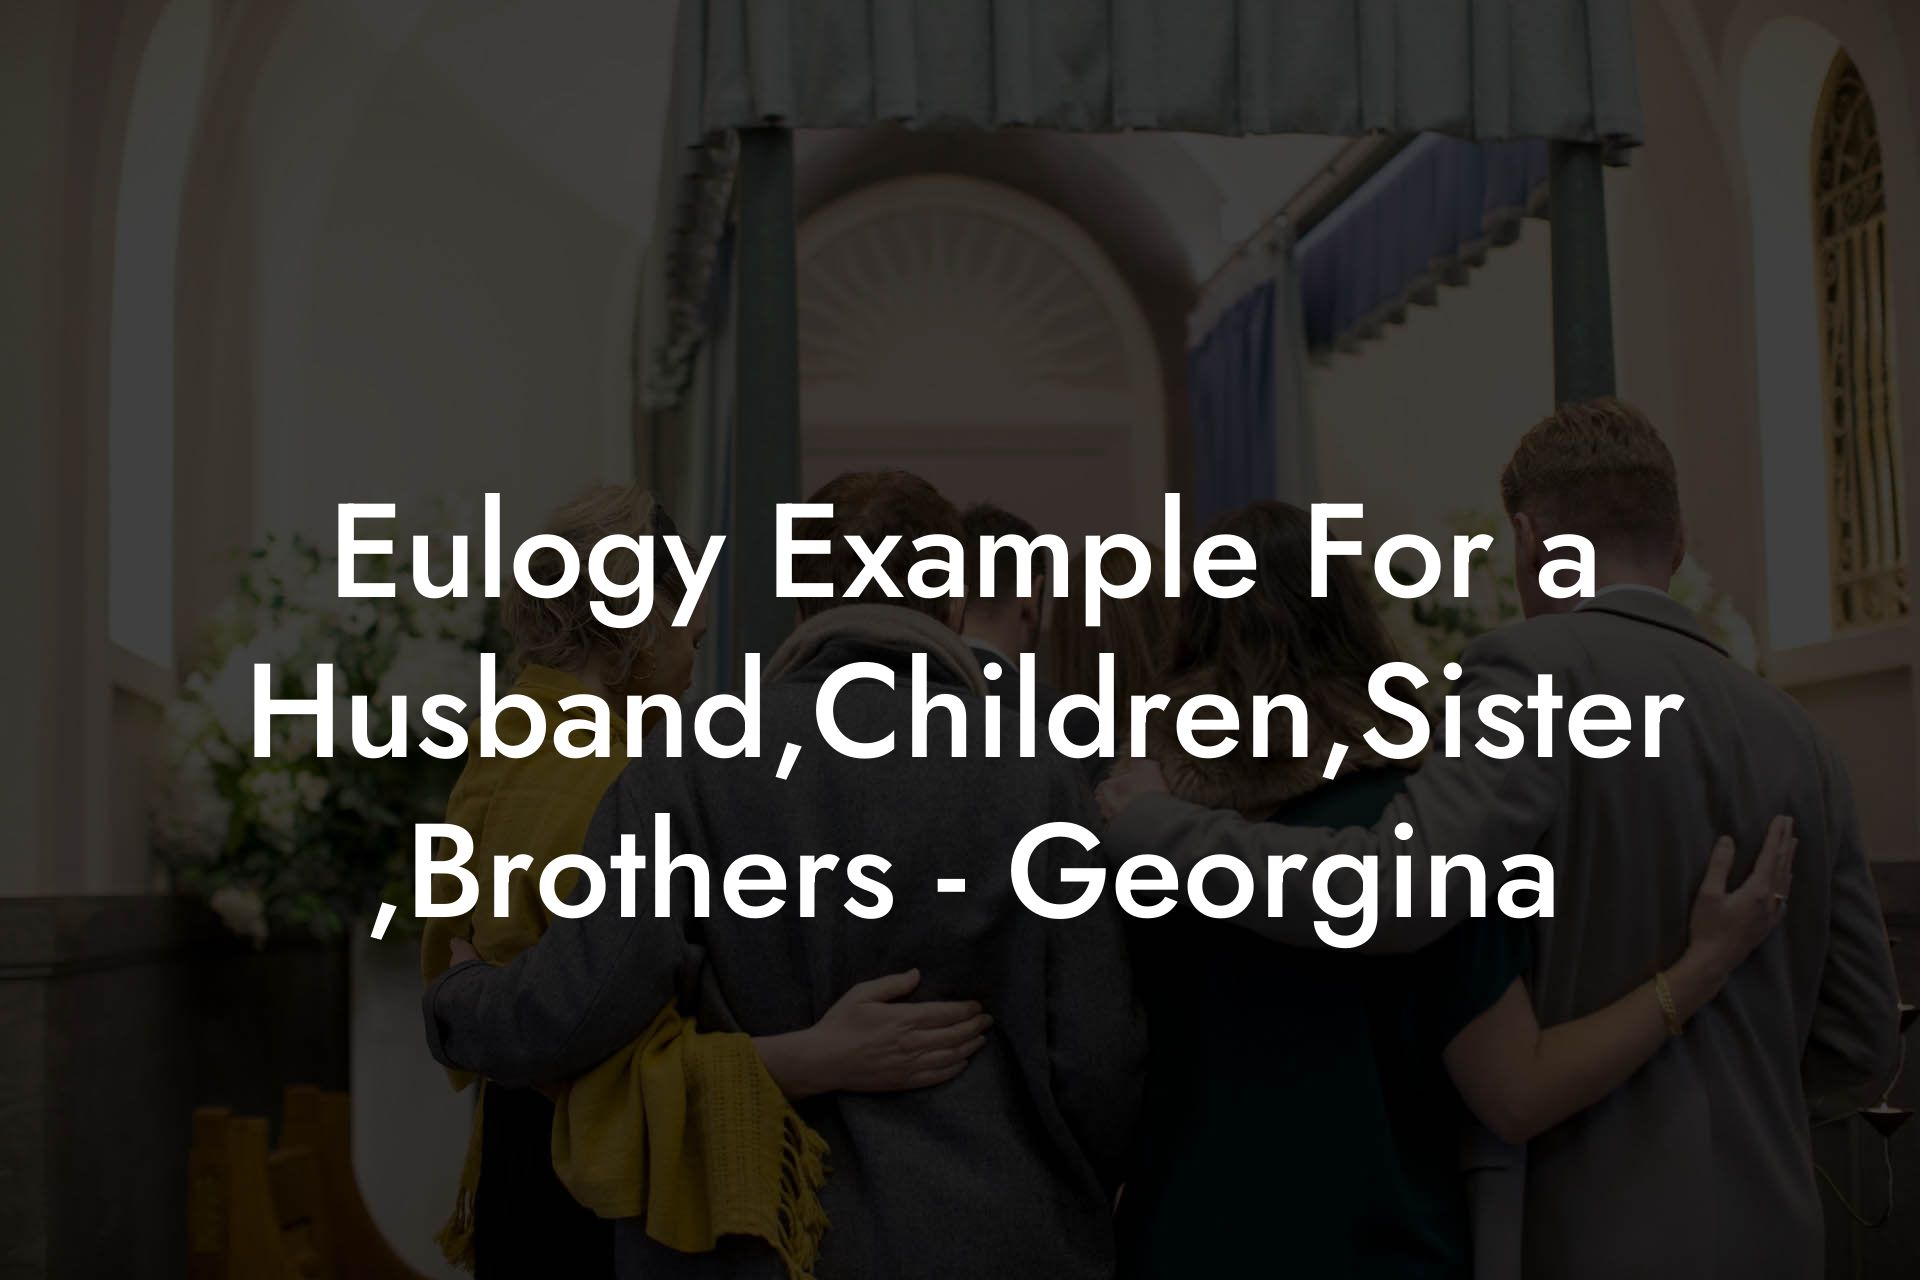 Eulogy Example For a Husband,Children,Sister ,Brothers - Georgina